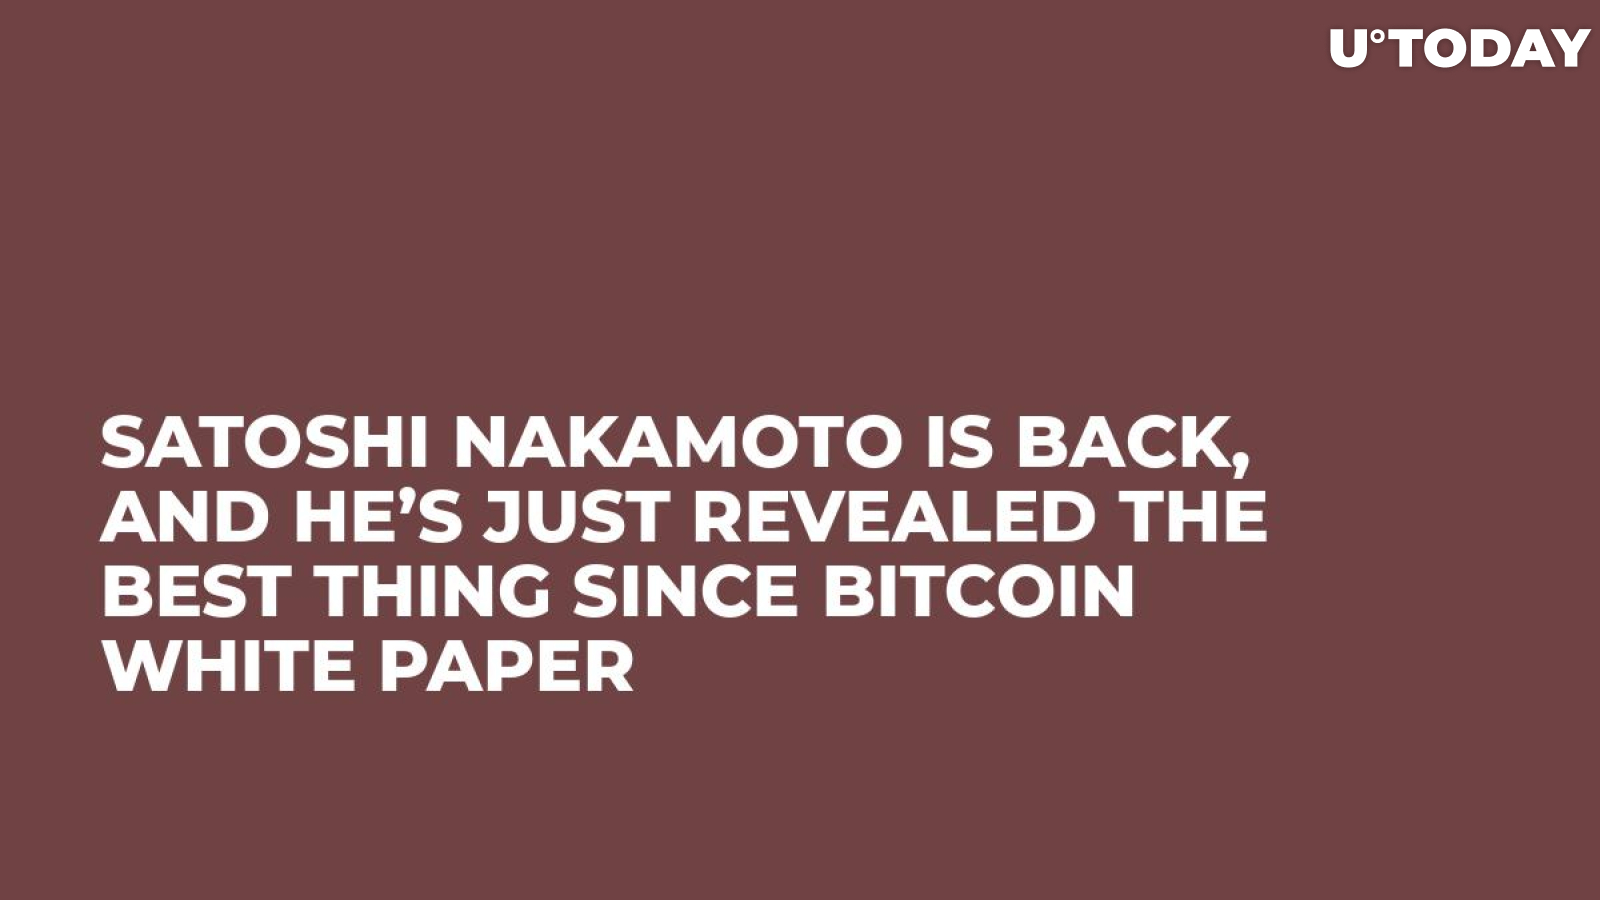 Satoshi Nakamoto Is Back, and He’s Just Revealed the Best Thing Since Bitcoin White Paper